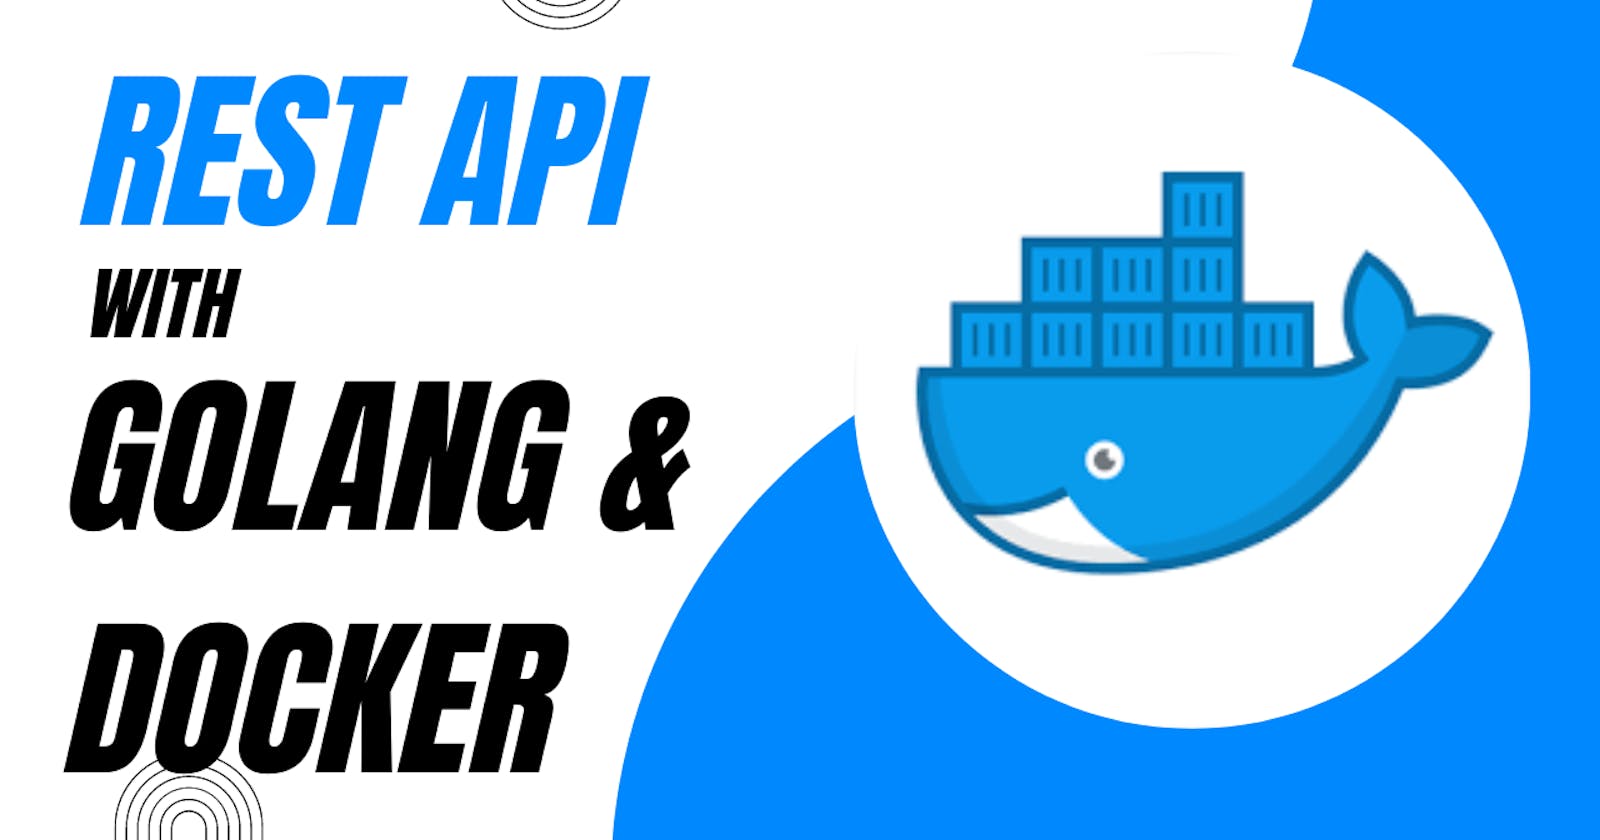 Getting Started with Go and Docker - Building and Dockerizing a RESTful API